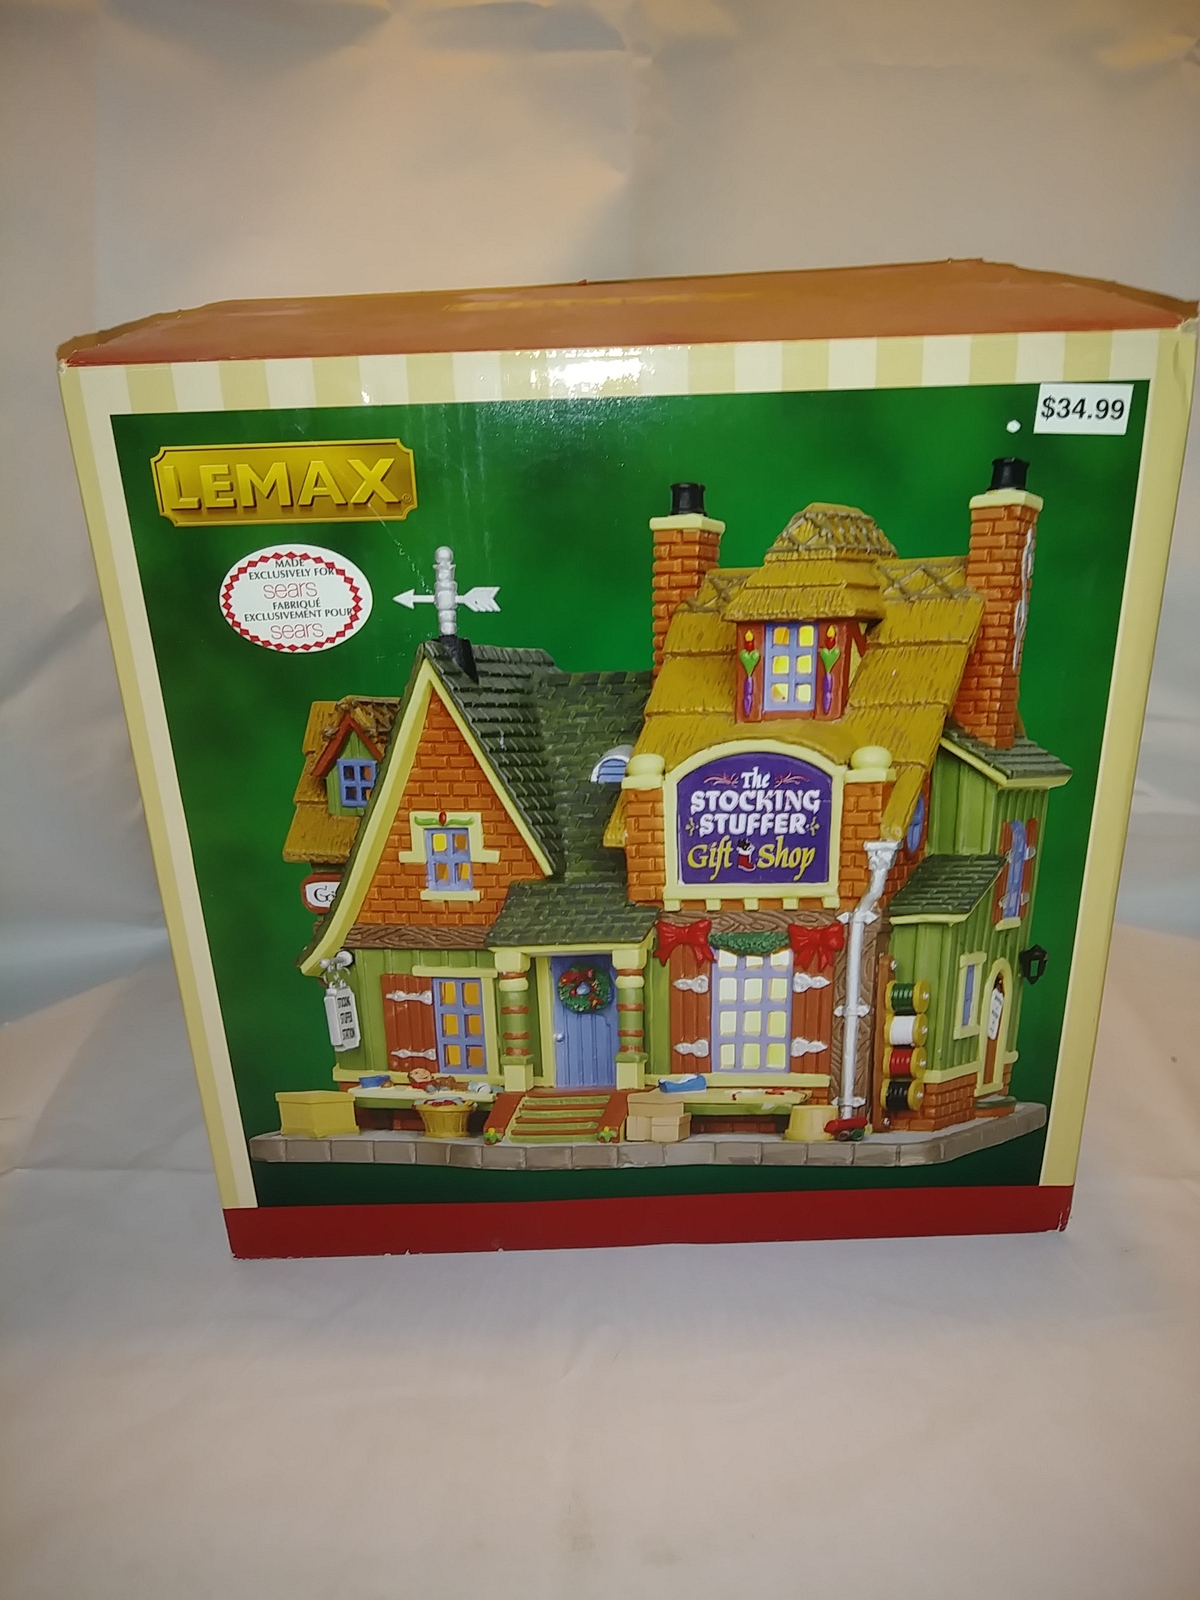 Lemax The Stocking Stuffer (Sears Exclusive) (2012 Retired) #25416 - $30.00